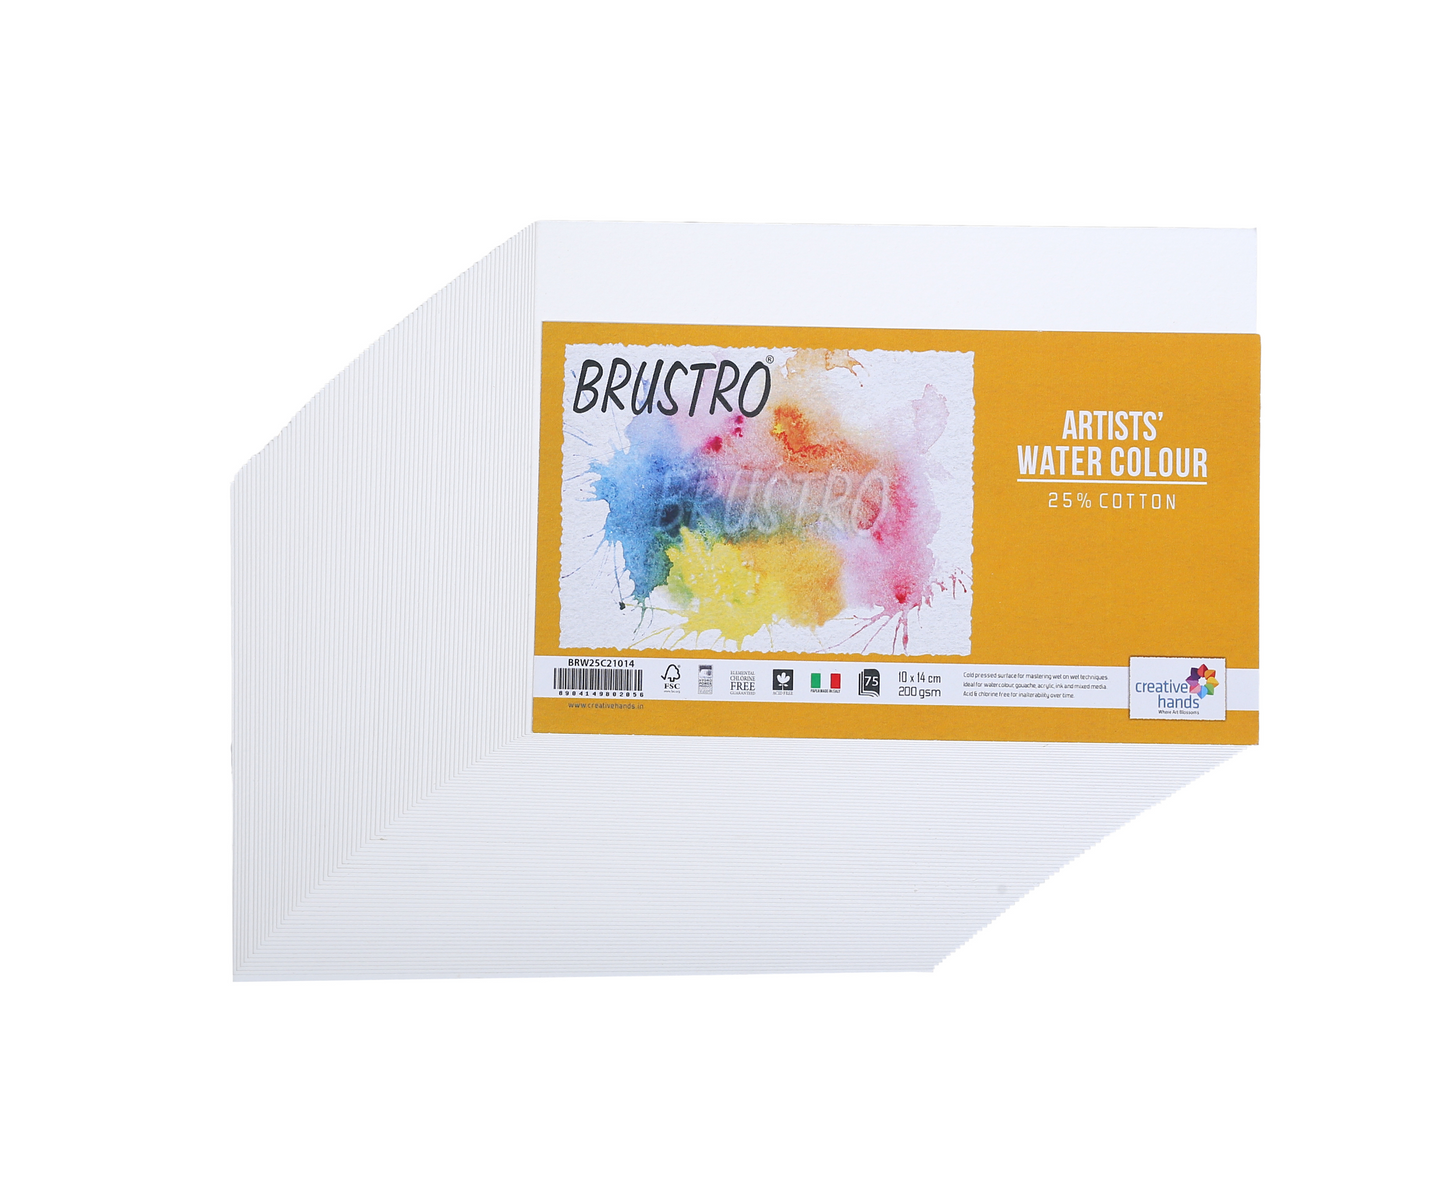 Brustro Artists’ Watercolour 25% Cotton 200gsm Cold Pressed 10 X 14 cm (75 Sheets)